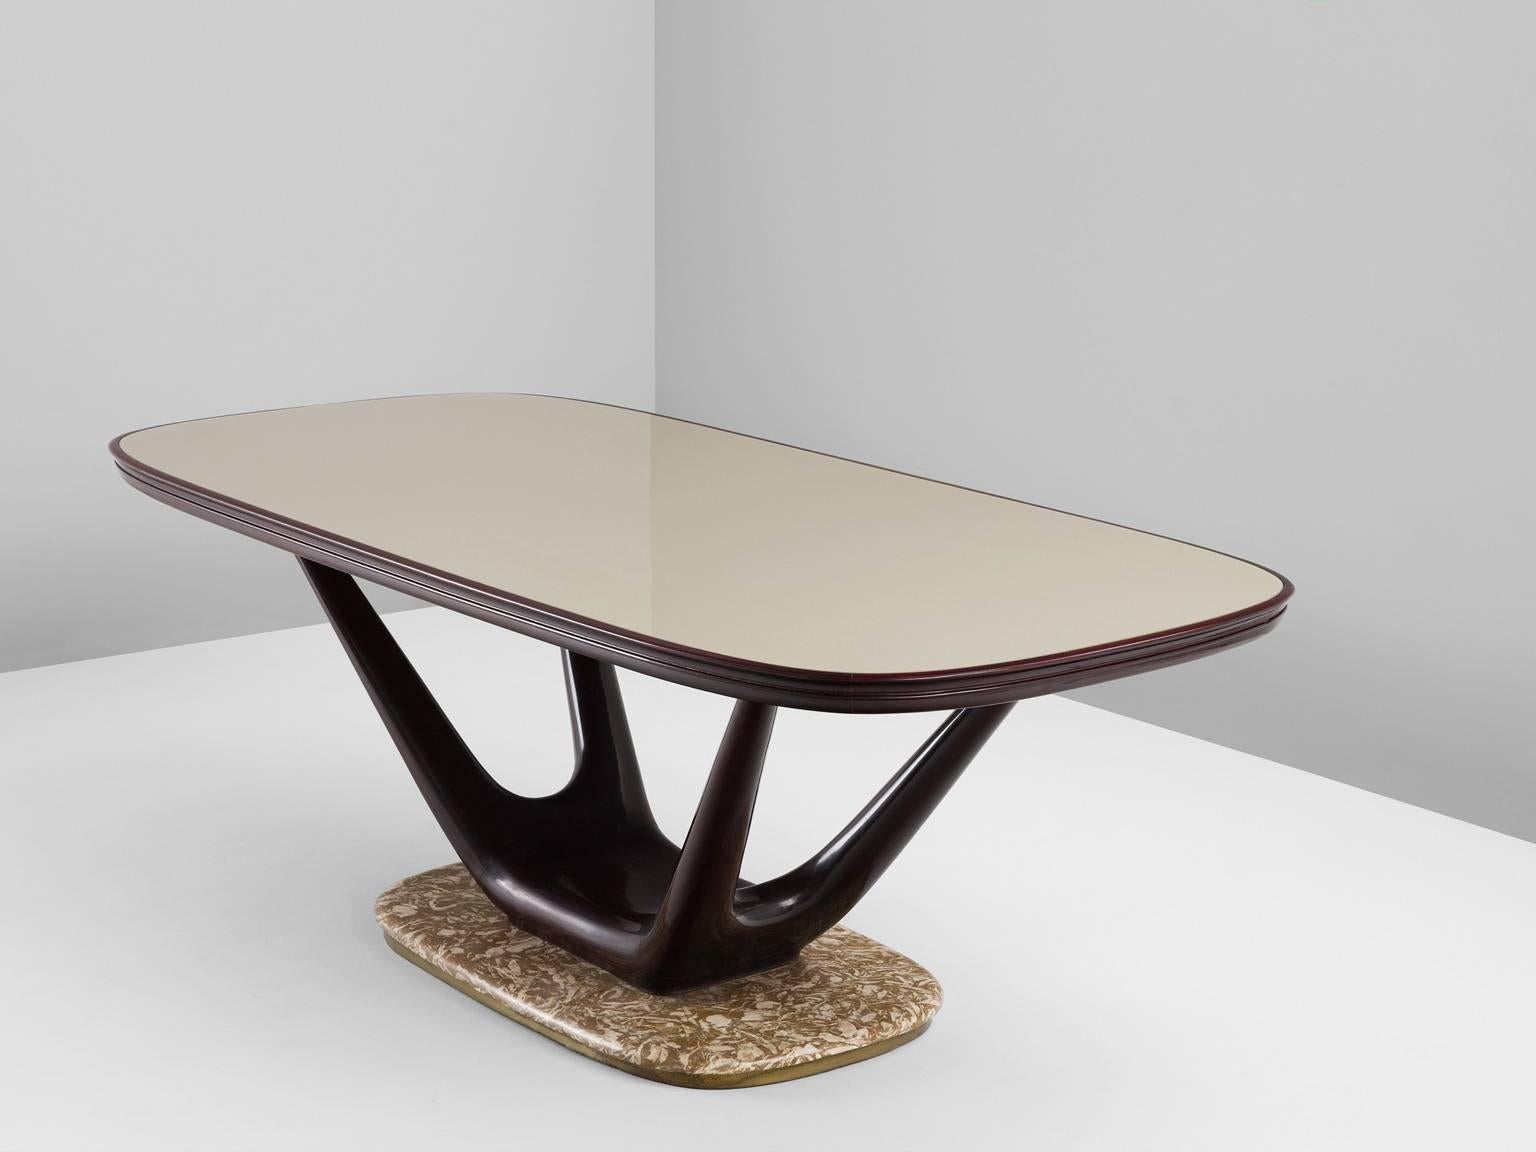 Table, in marble, glass and mahogany, Italy, 1950s.

Luxurious center table with marble base and glass top in the style of Italian designer Vittorio Dassi. A rectangular top with rounded edges. The top is made of glass with a beautiful champagne